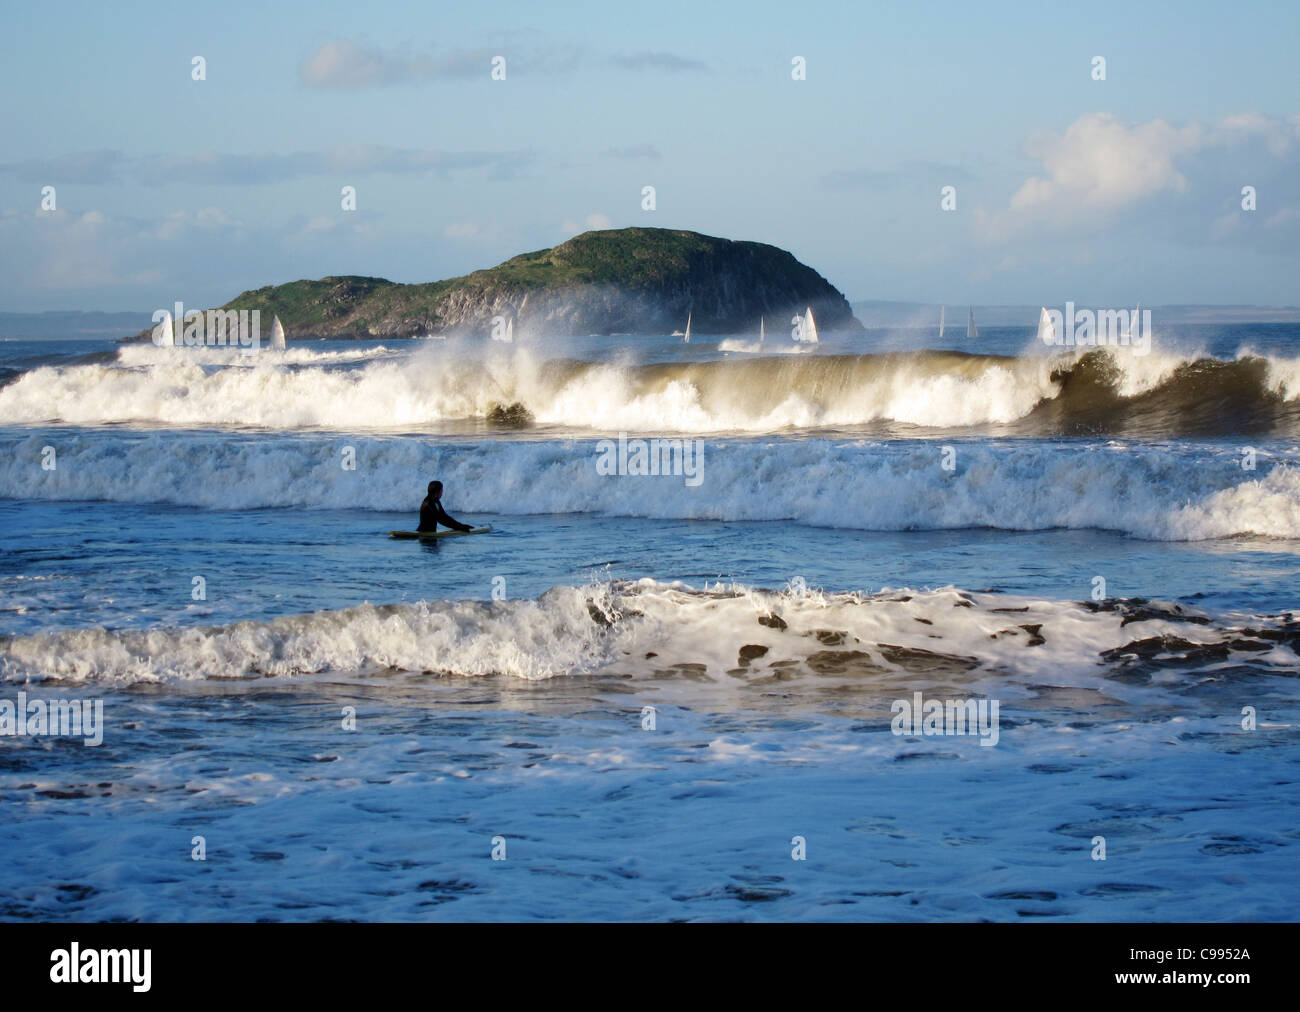 Crashing waves on the coast at North Berwick, Scotland in November. Craigleith Island is in the background. Stock Photo